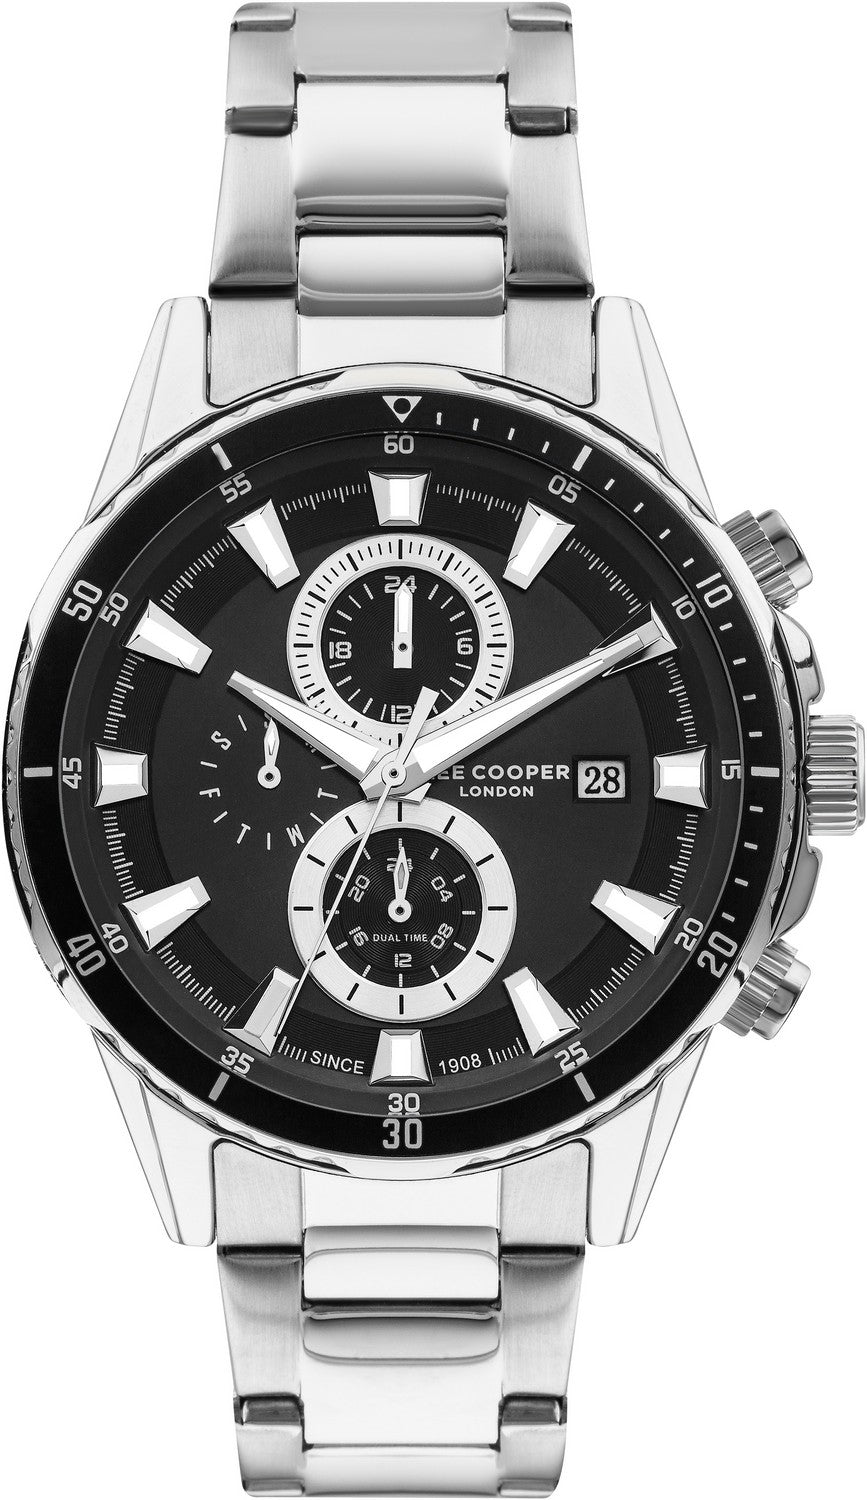 Lee Cooper Chronograph for Men's Wrist Watch | Watches & Accessories | Halabh.com